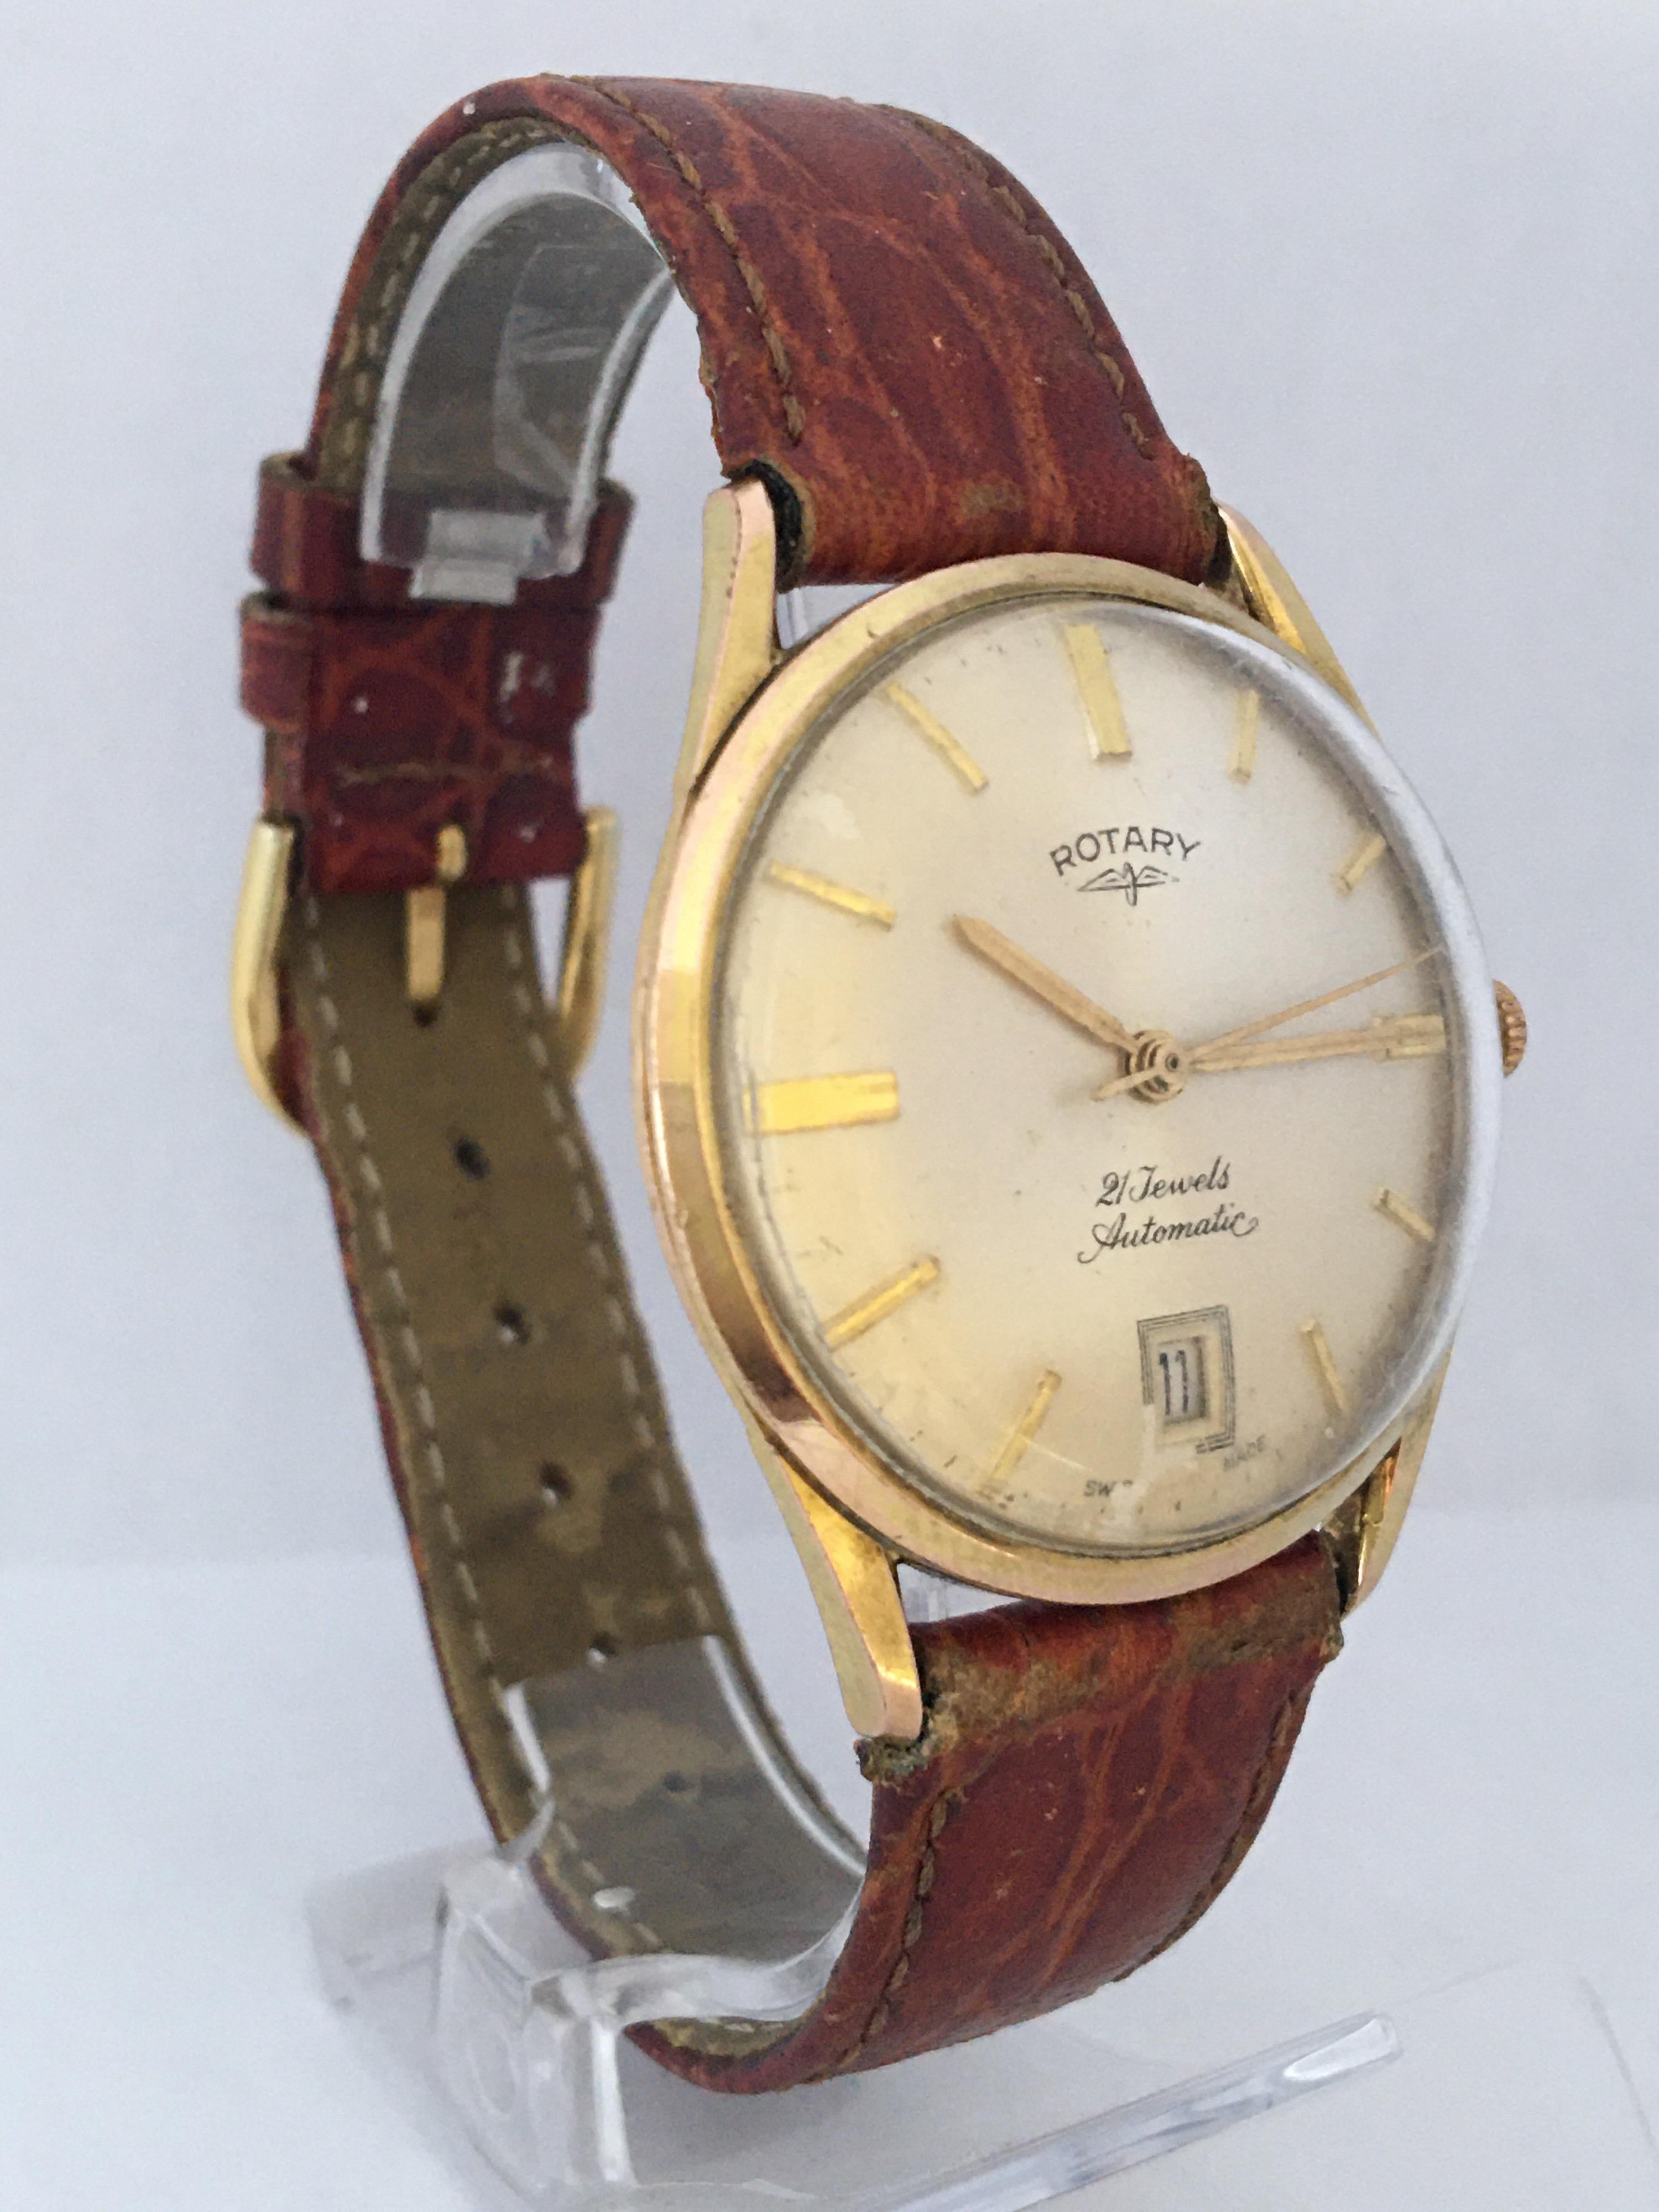 This beautiful pre-owned 35mm diameter vintage mechanical watch is in good working condition and it is ticking well. Visible signs of ageing and wear with light scratches and tarnished on the watch case as shown. The dial and the watch strap are a